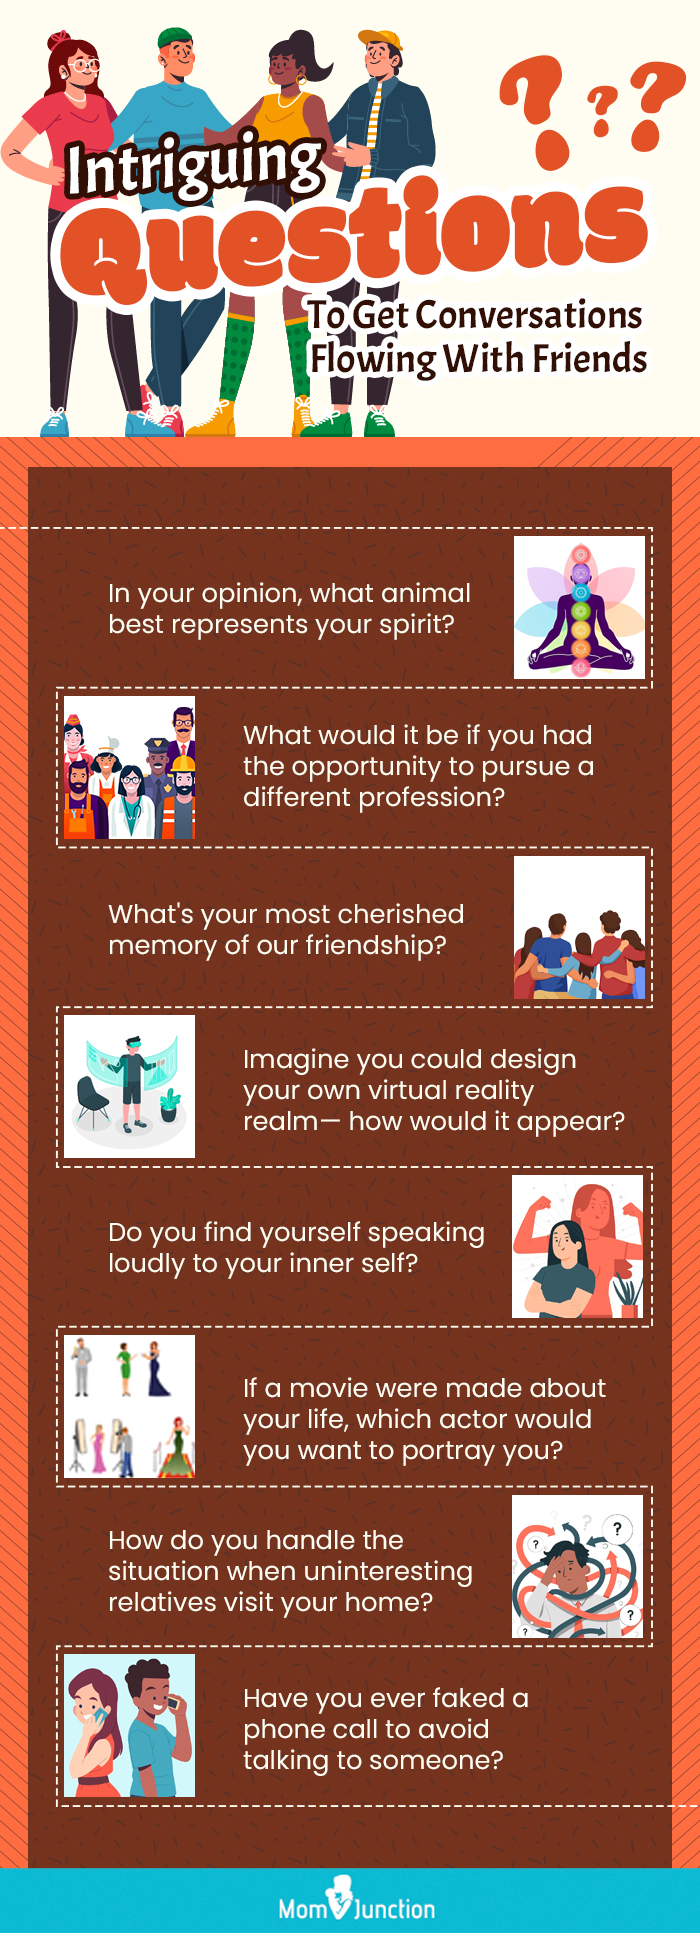 intriguing questions to get conversations flowing with friends (infographic)